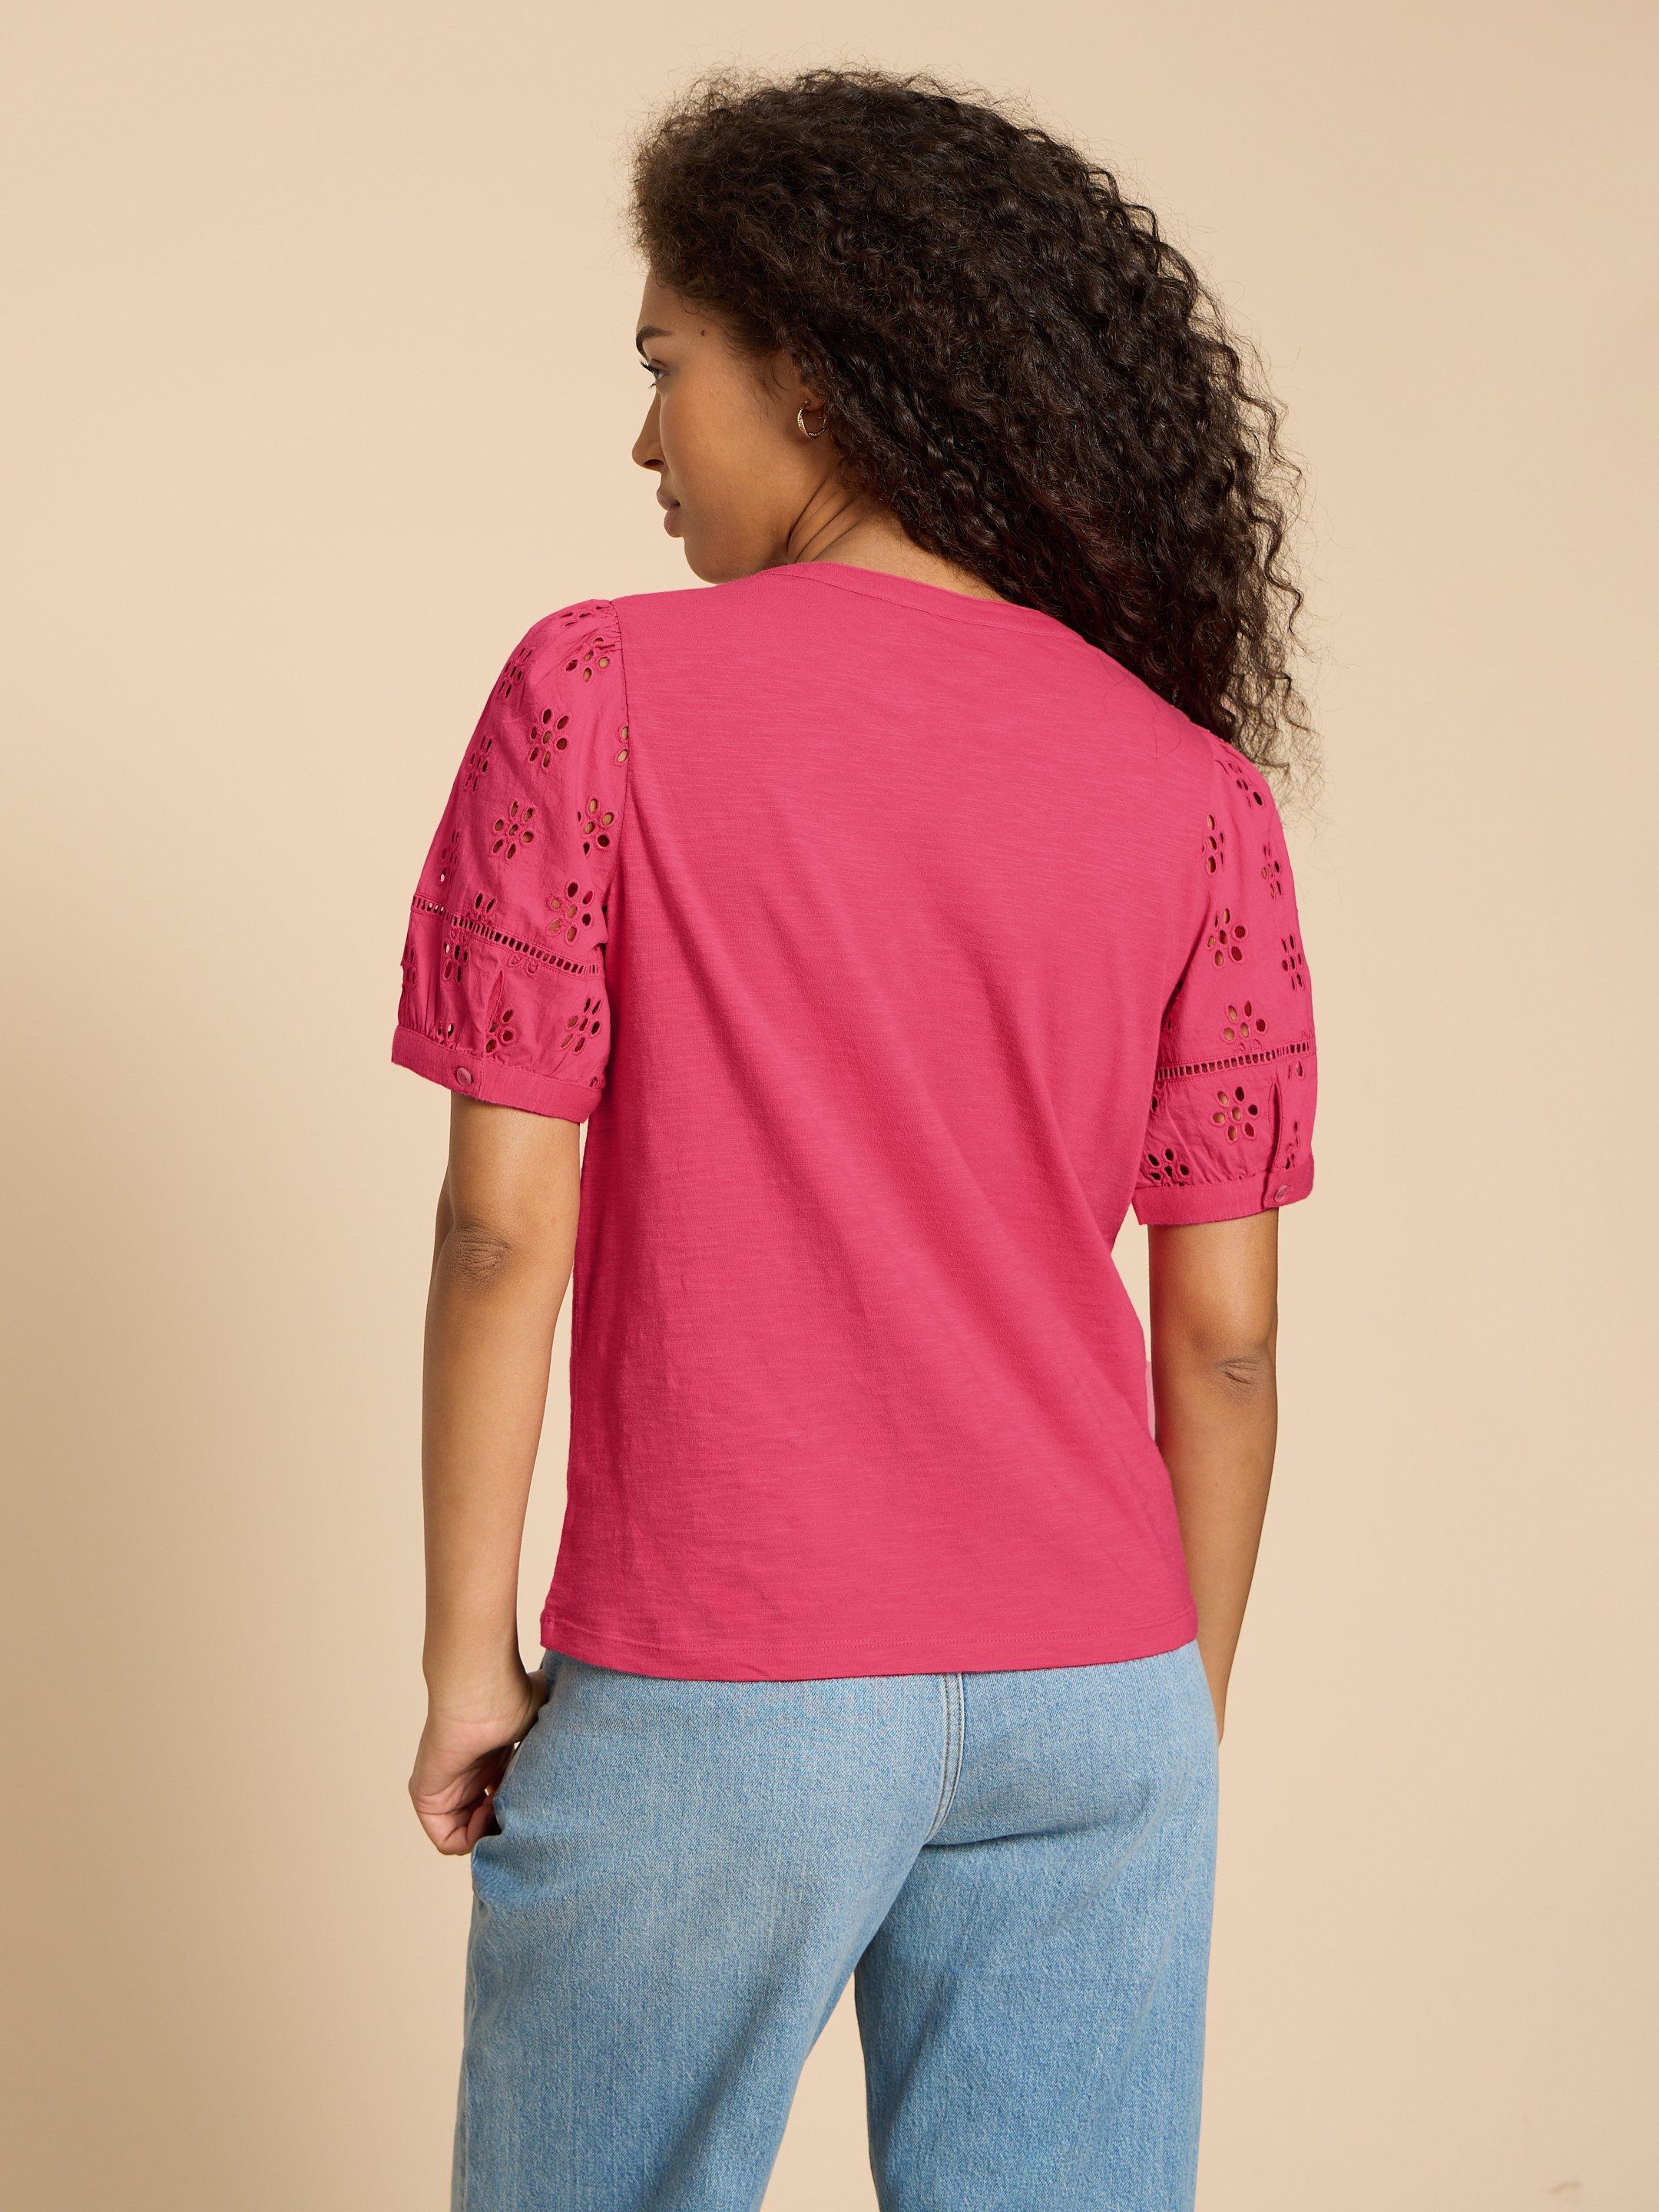 BELLA BRODERIE MIX TOP in MID PINK - MODEL BACK